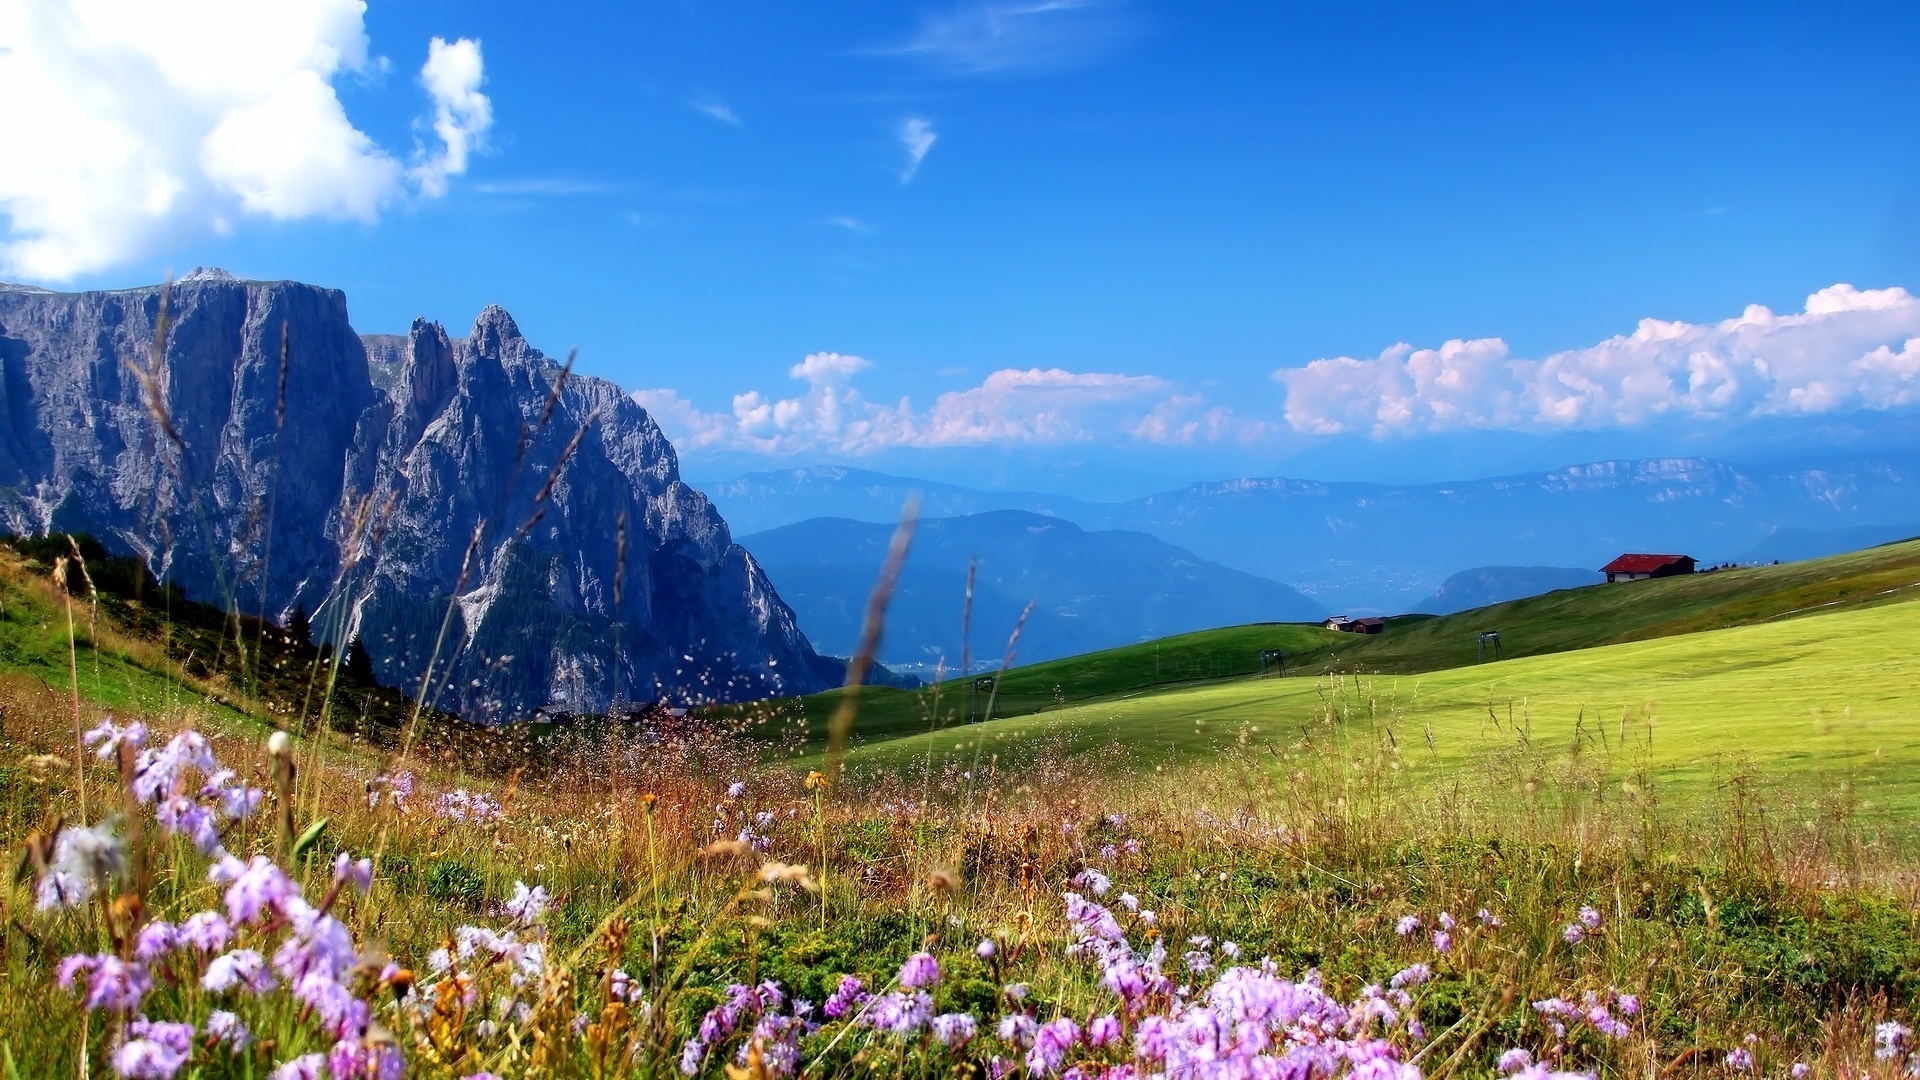 Mountains, Meadows, Flowers, Valley, The Sky, Spring - Tapety Na Plochu Jaro - HD Wallpaper 